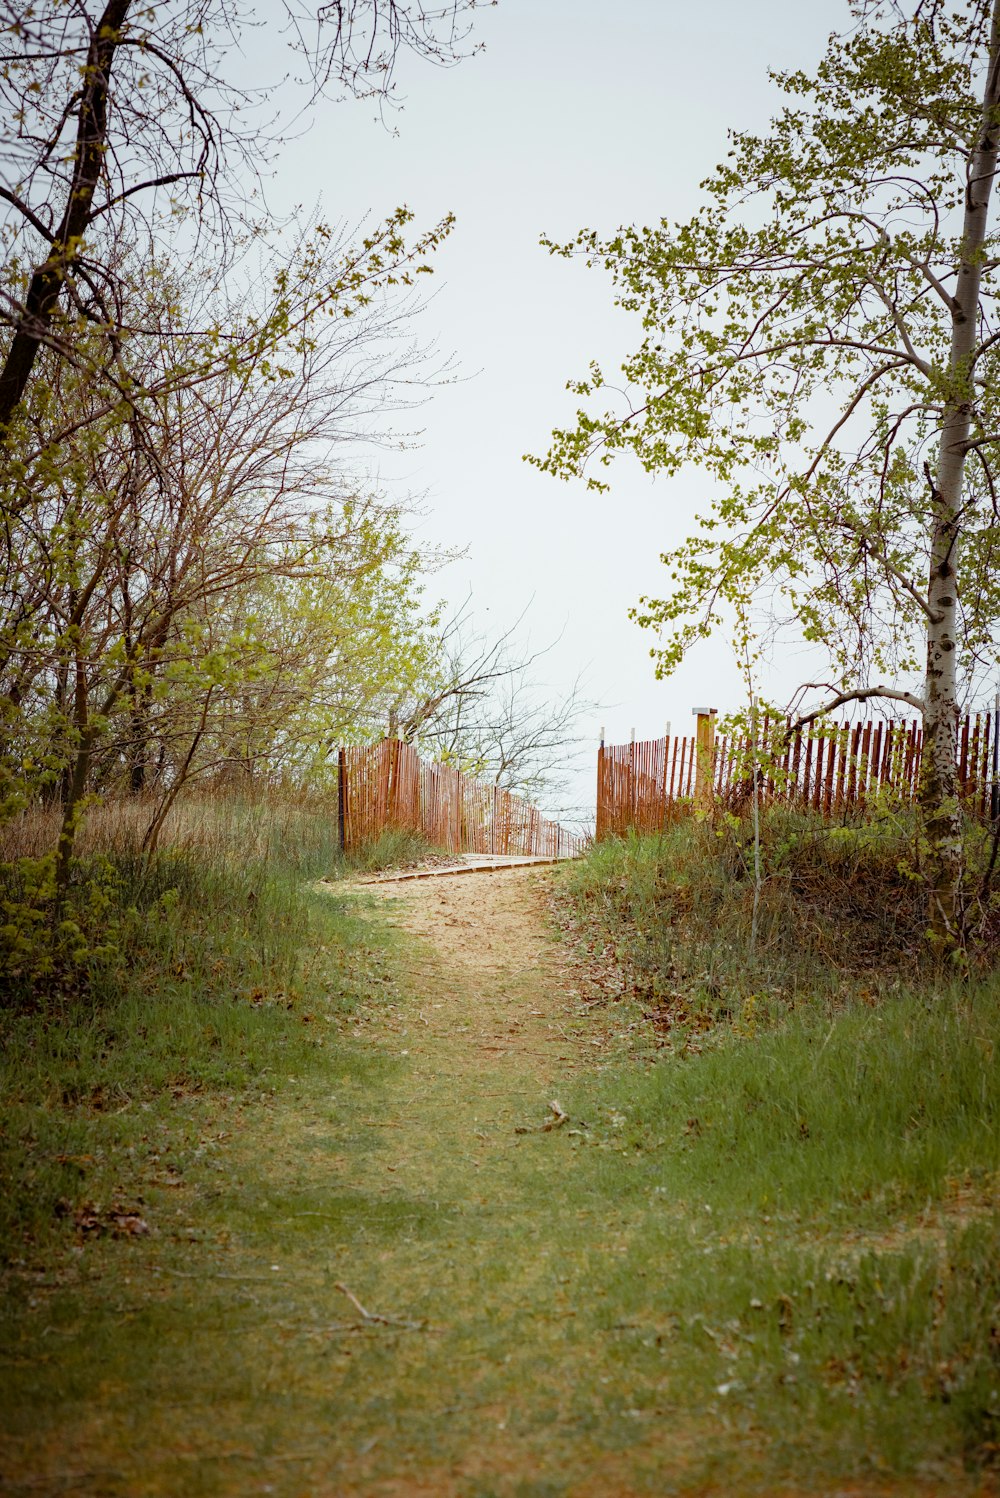 brown wooden fence near green grass field and trees during daytime